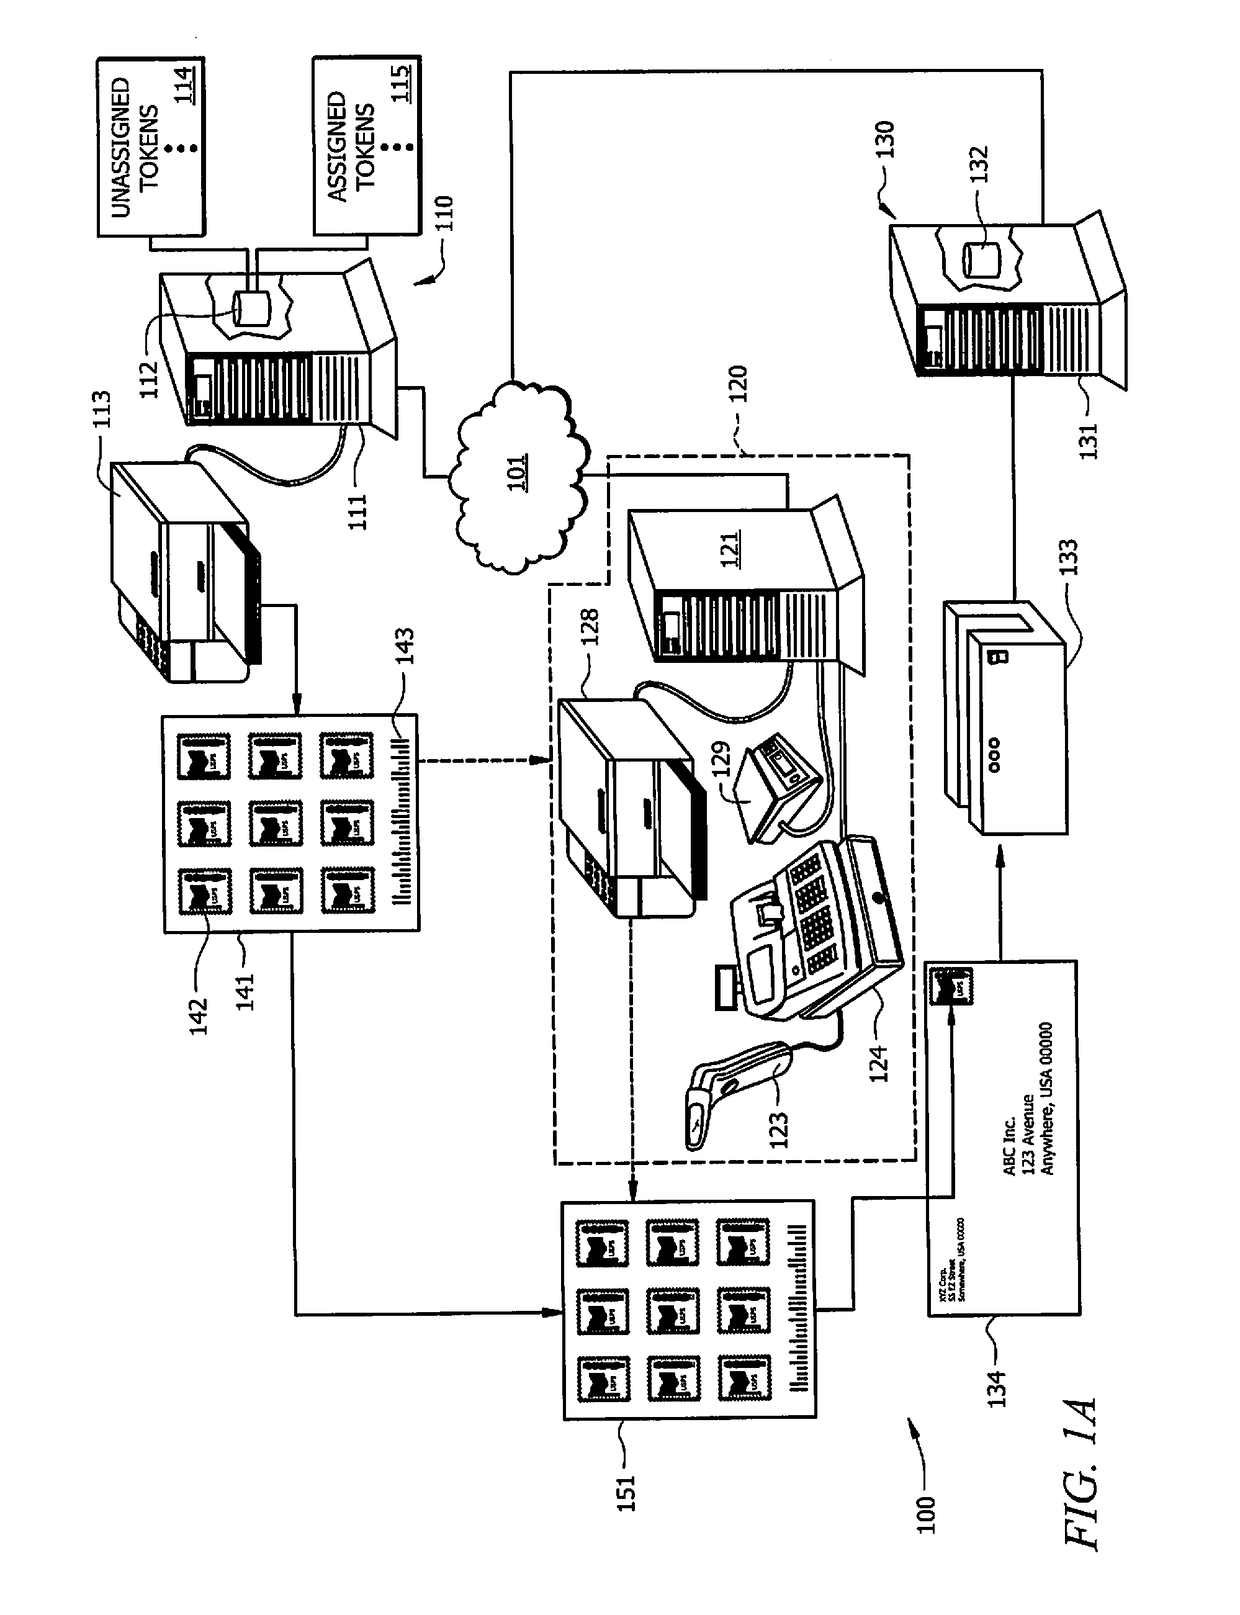 Systems and methods for activation of postage indicia at point of sale